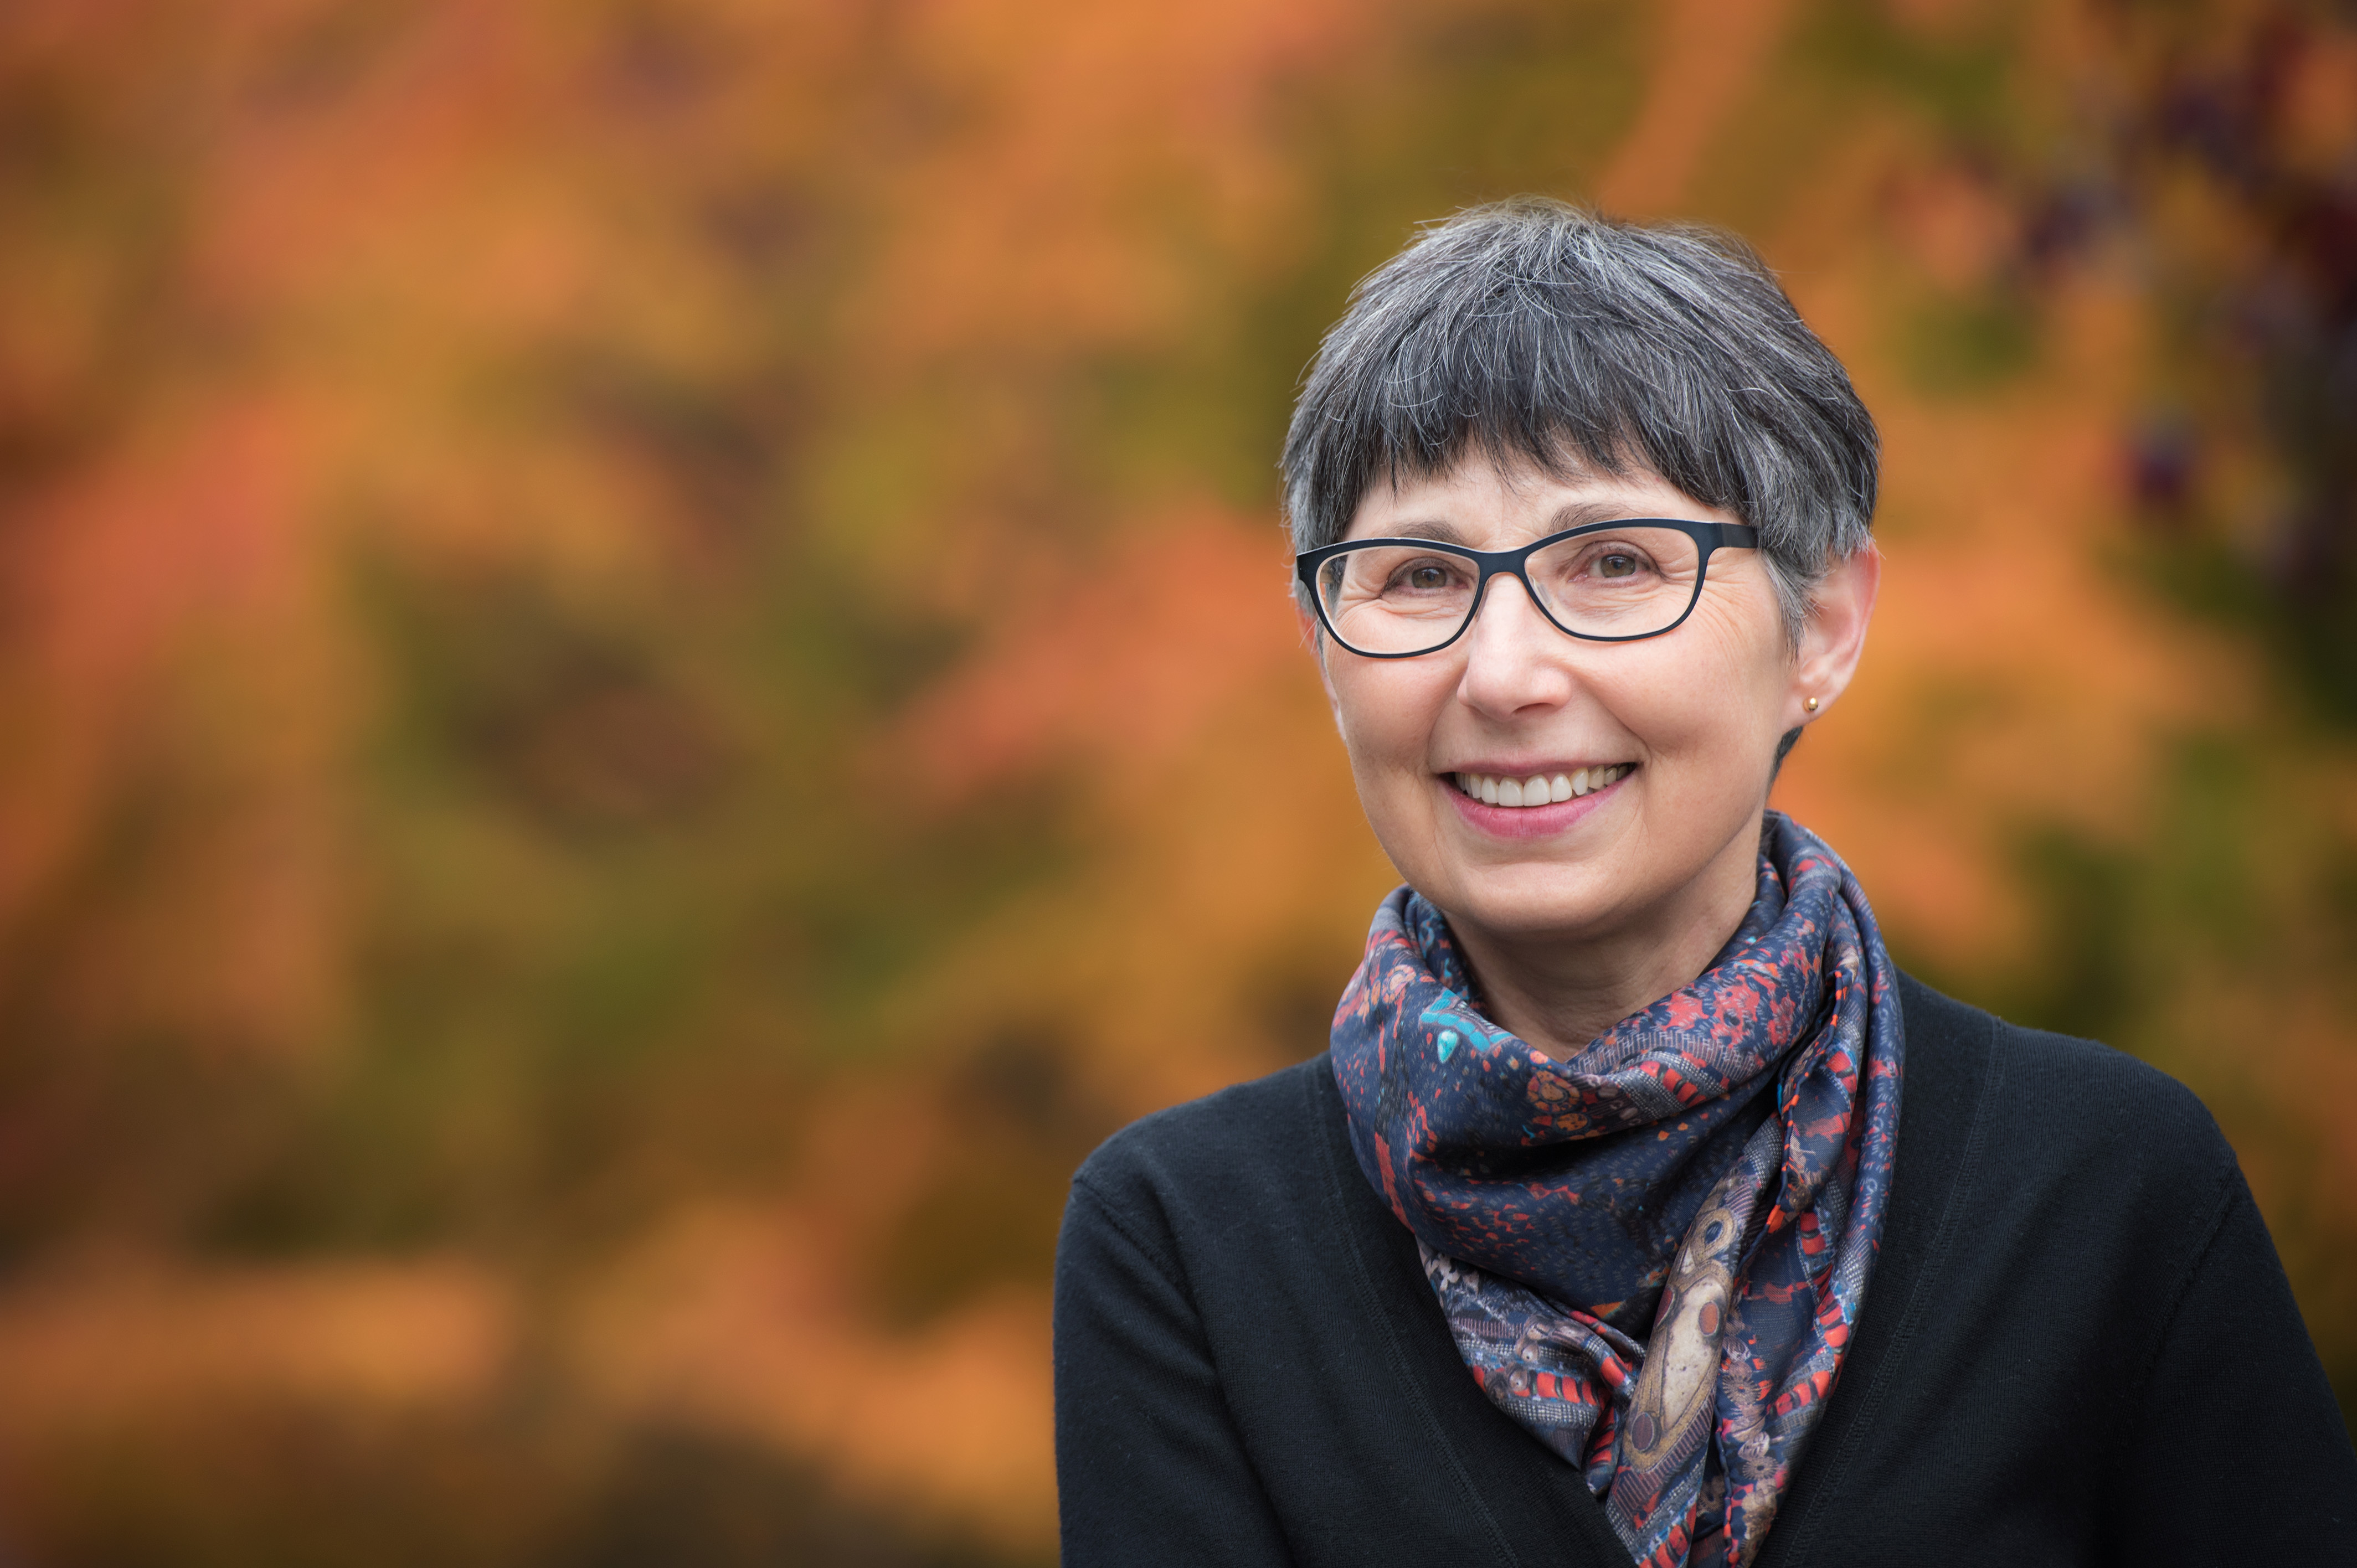 Headshot of Dr. Janet Werker. She is has short, dark hair, glasses and has a dark-coloured scarf around her neck. She is smiling.